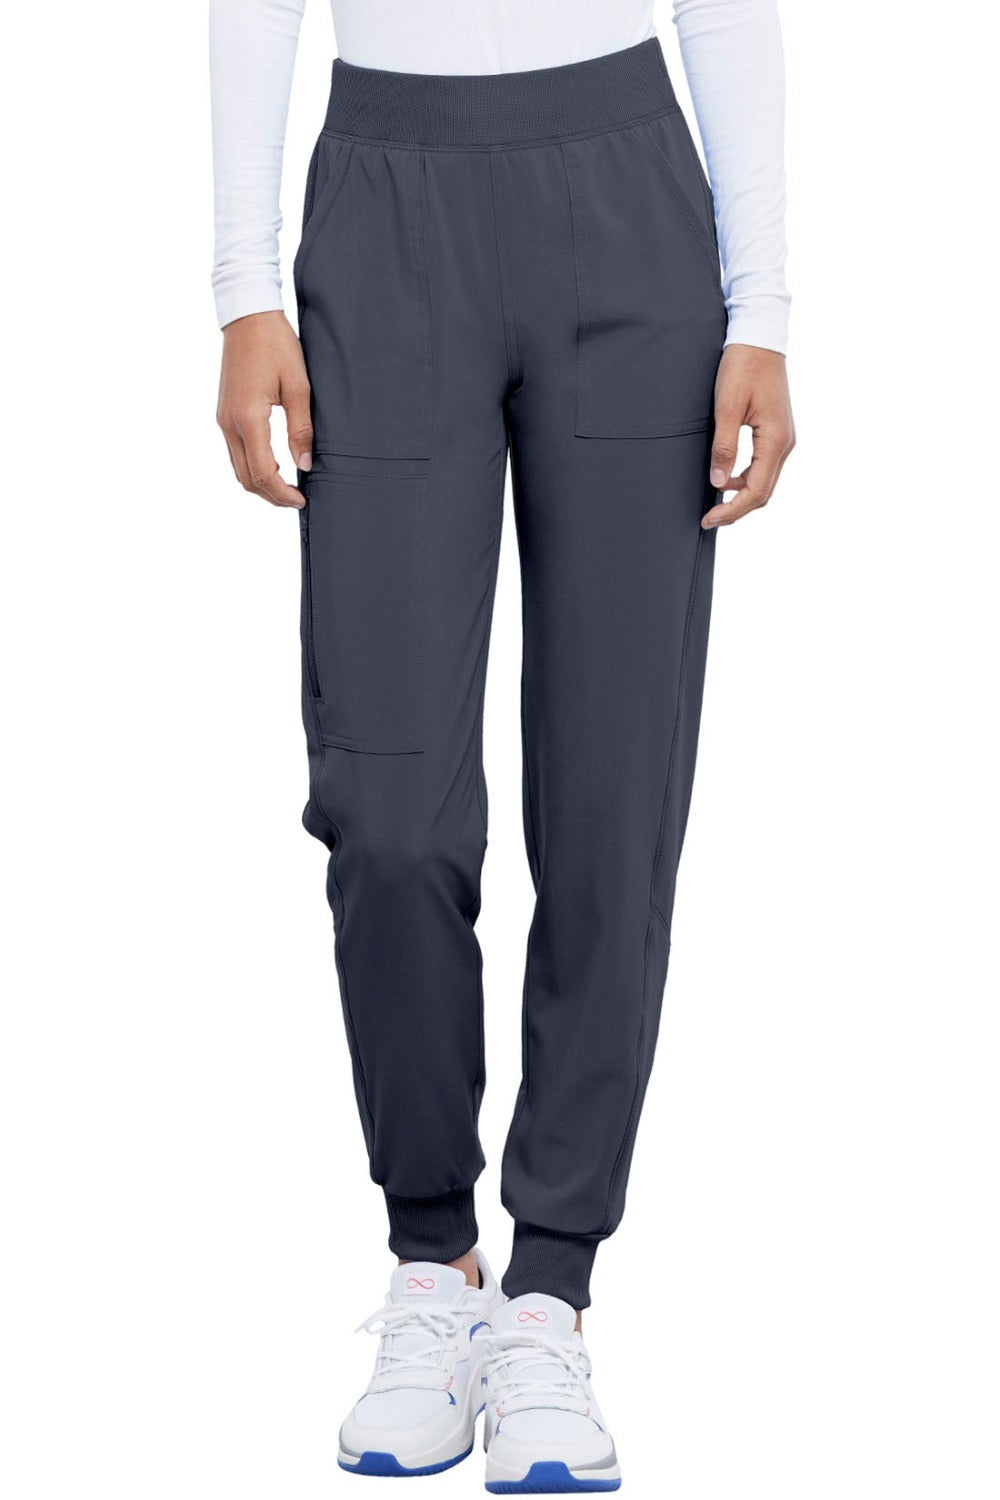 Cherokee Allura Scrub Pant Pull On Jogger in Pewter at Parker's Clothing and Shoes.